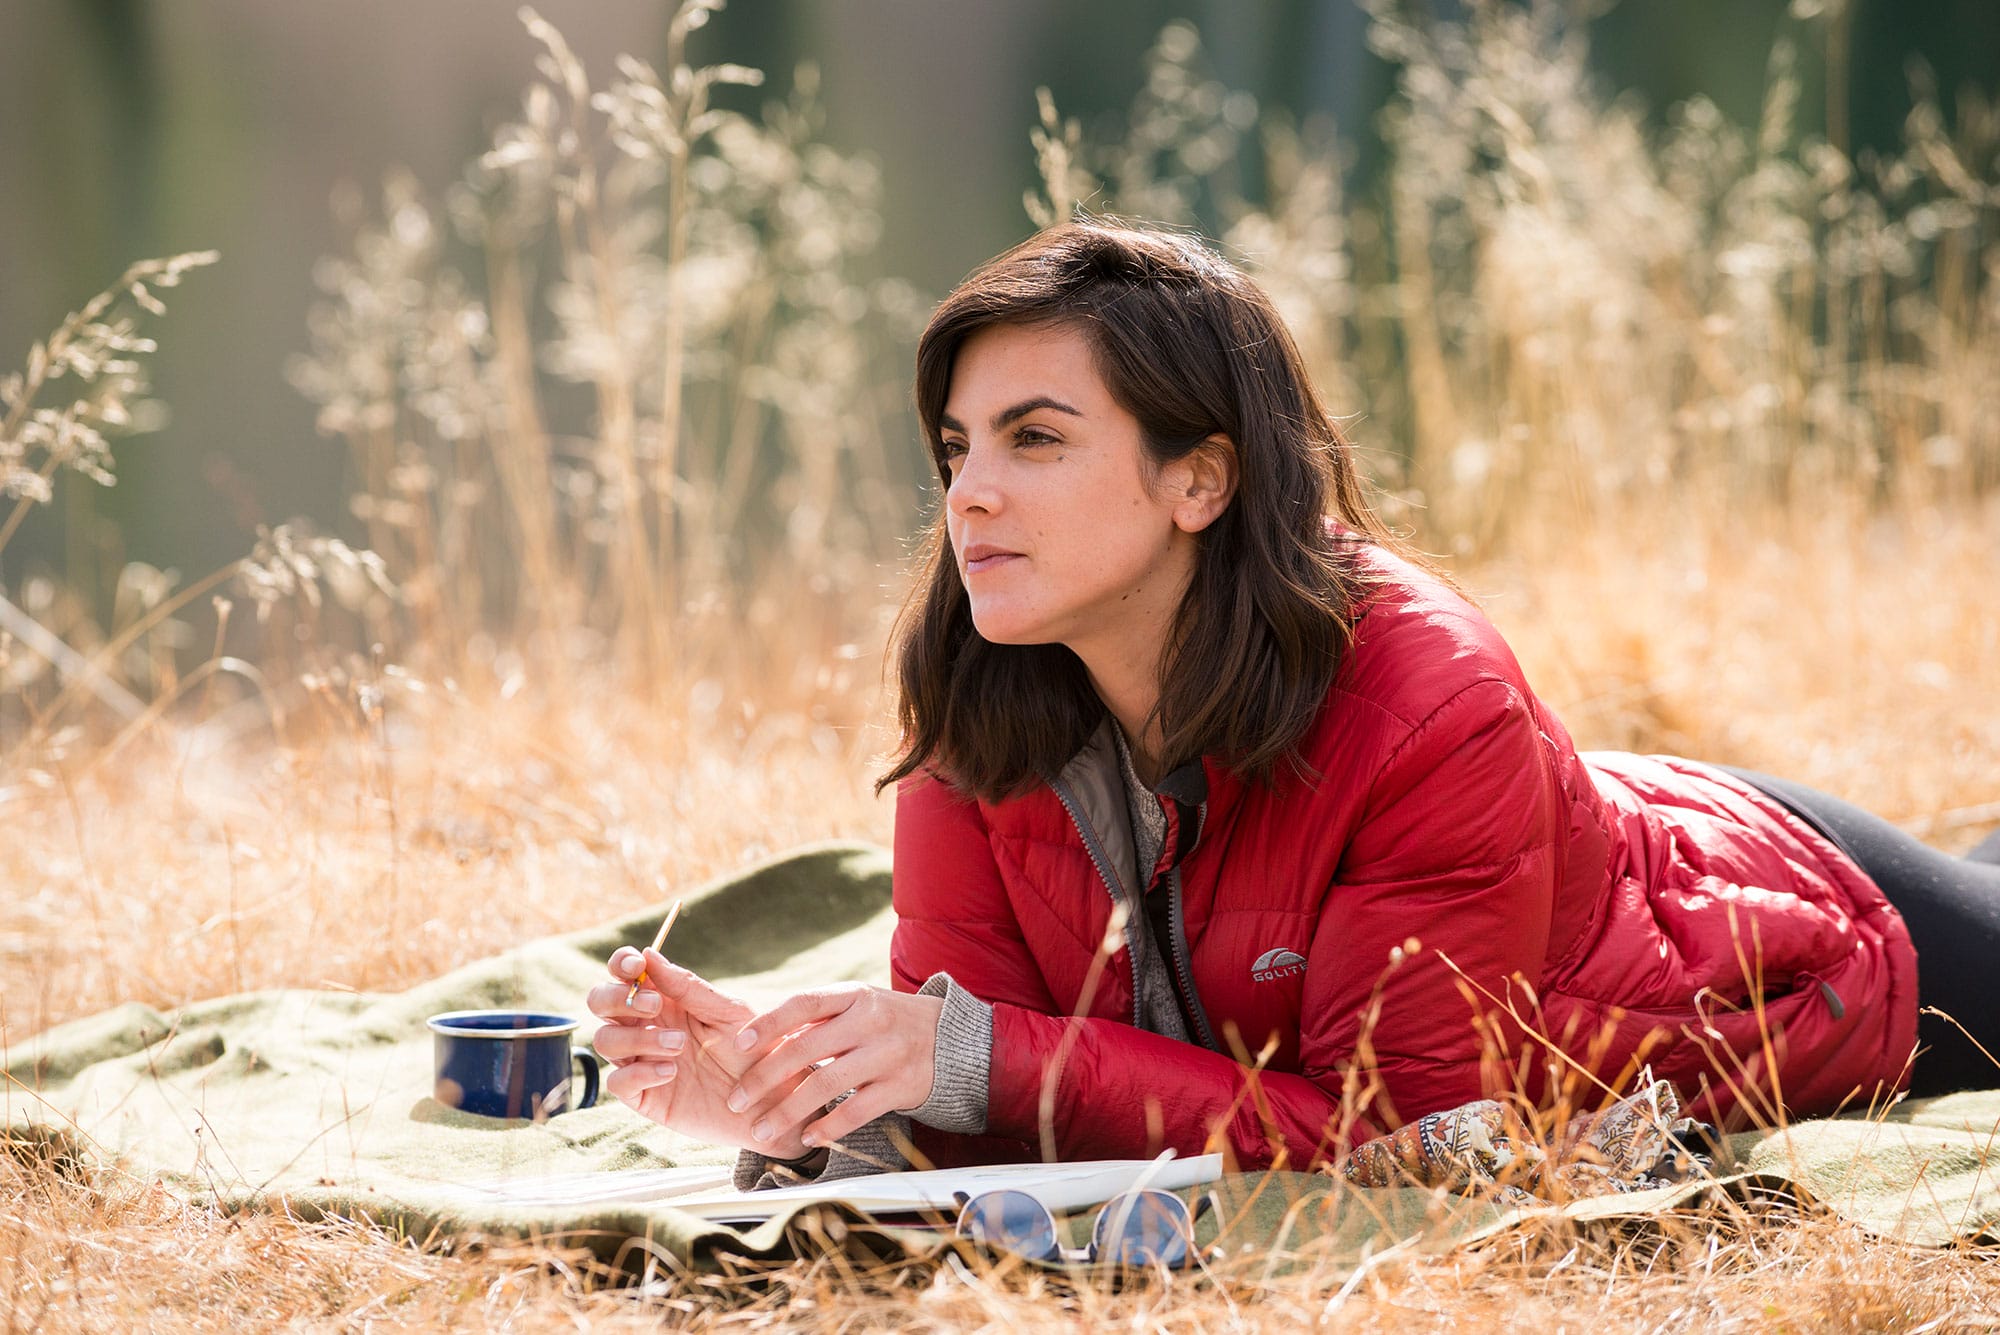 A woman in a red jacket laying on a blanket in a field.